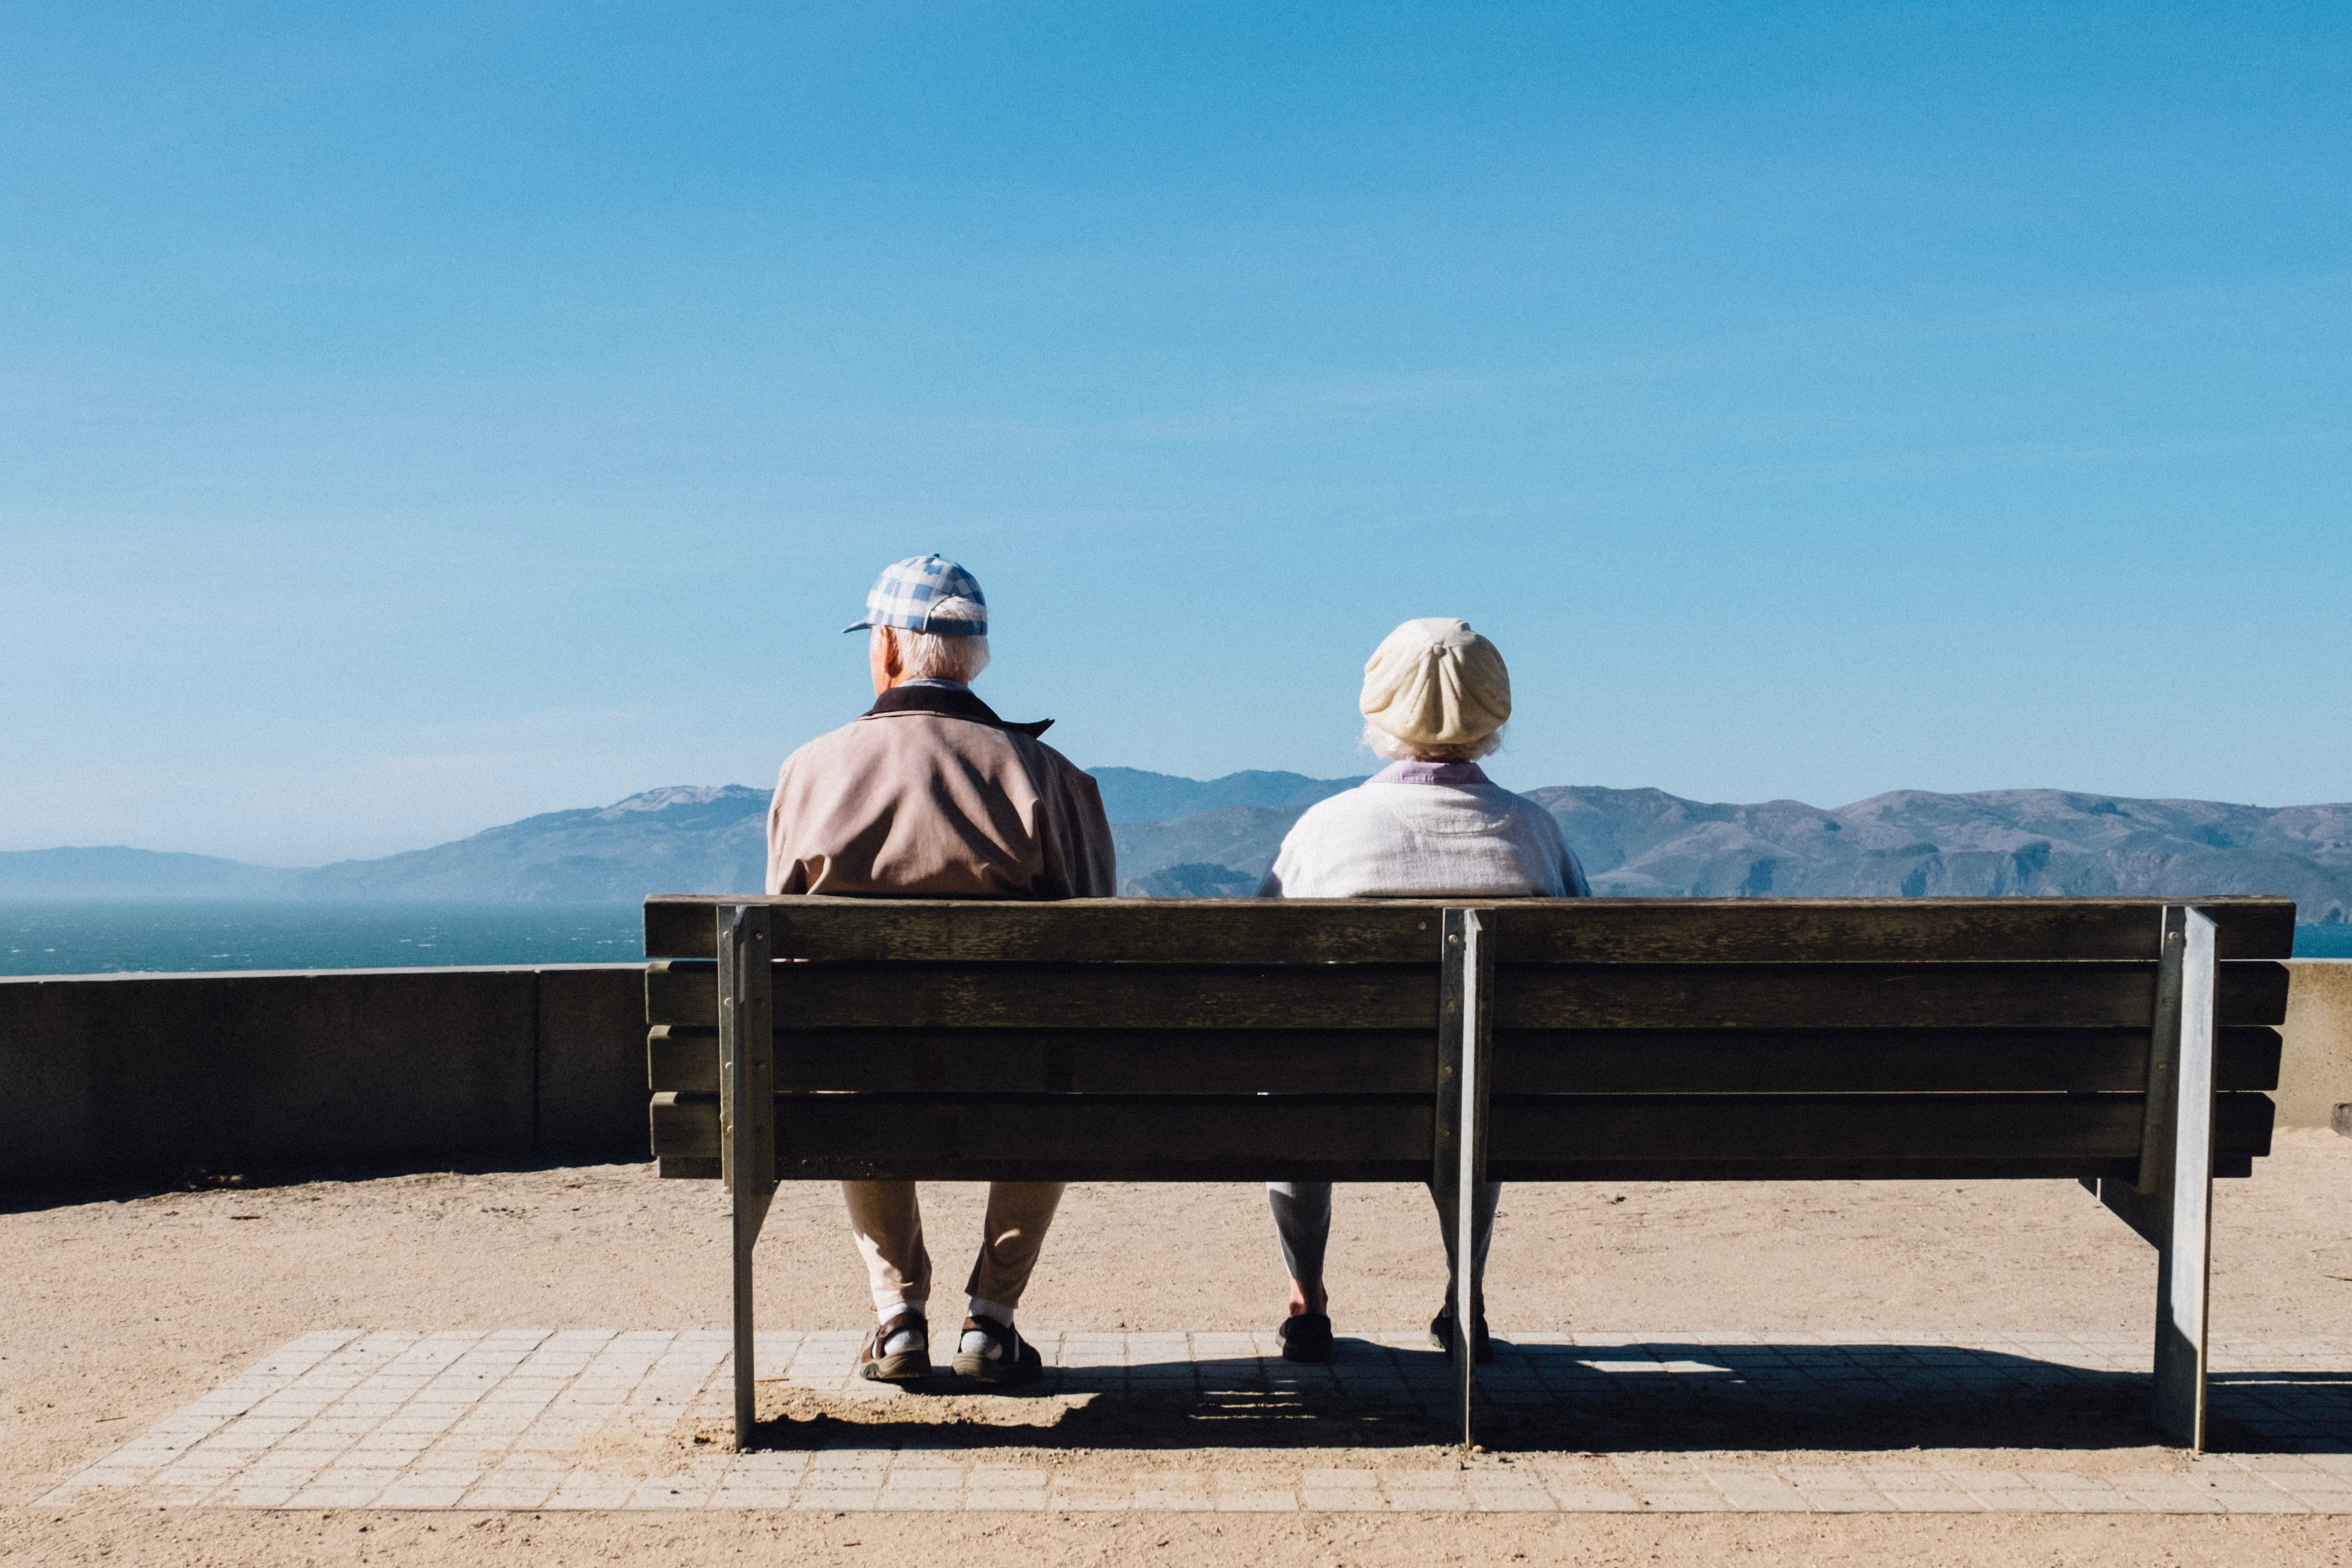 An old couple sitting on a bench. | Source: Unsplash